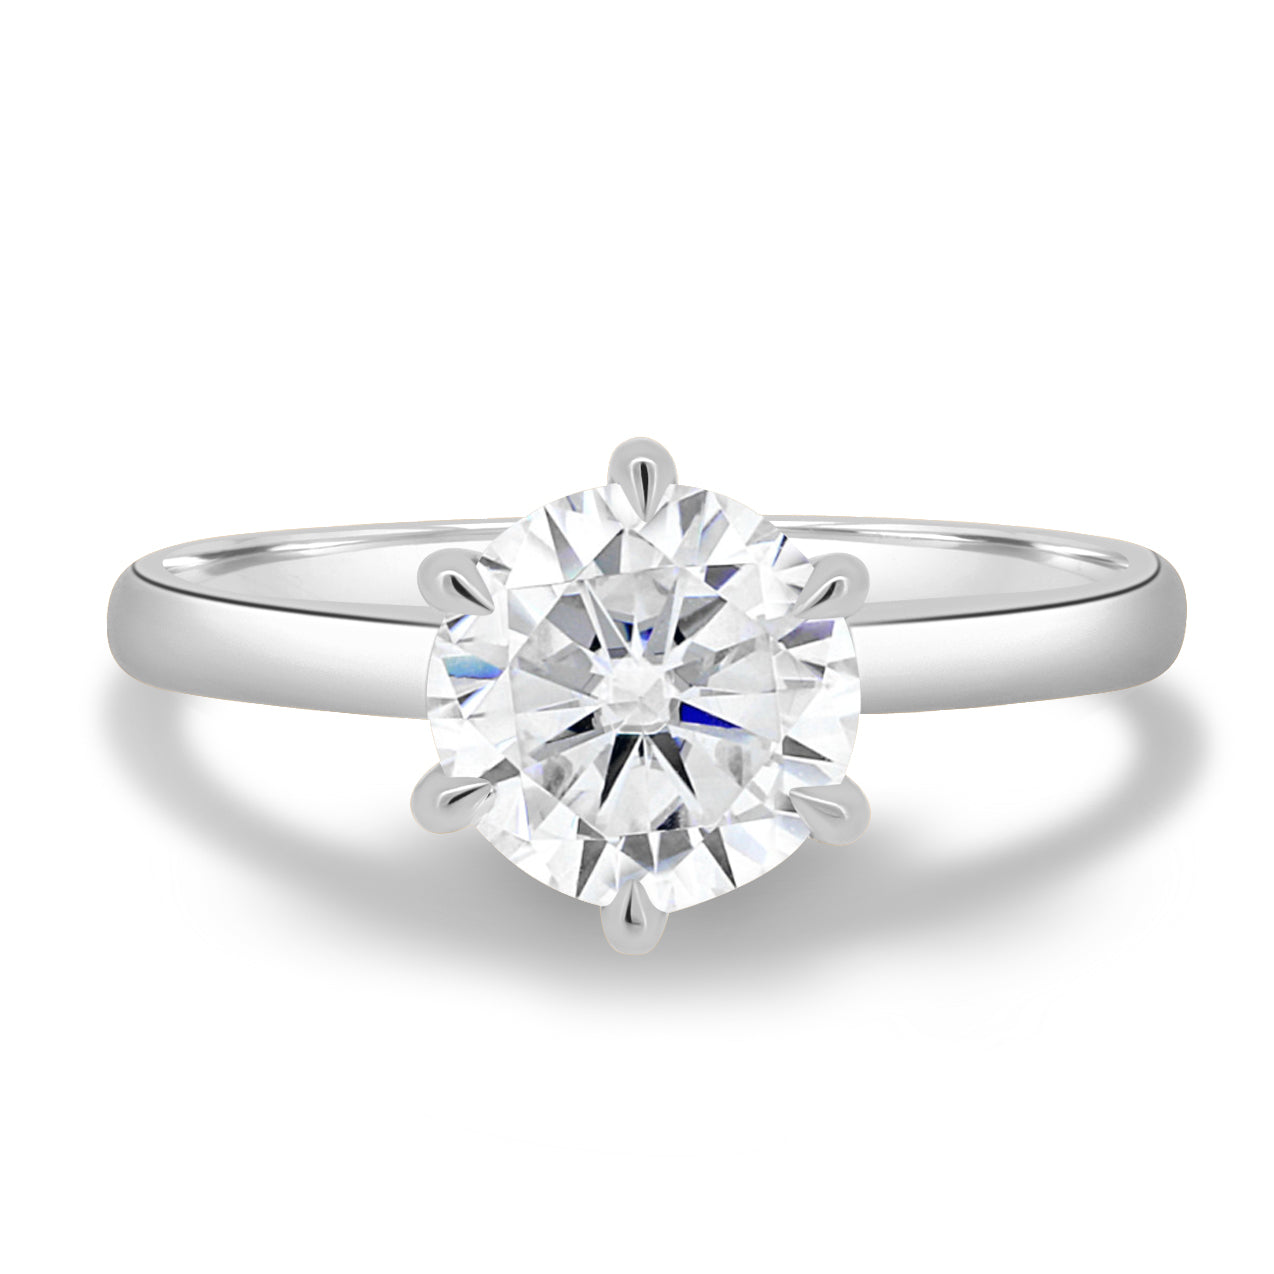 1.83 CT Round Solitaire CVD G/VS2 Diamond Engagement Ring 1